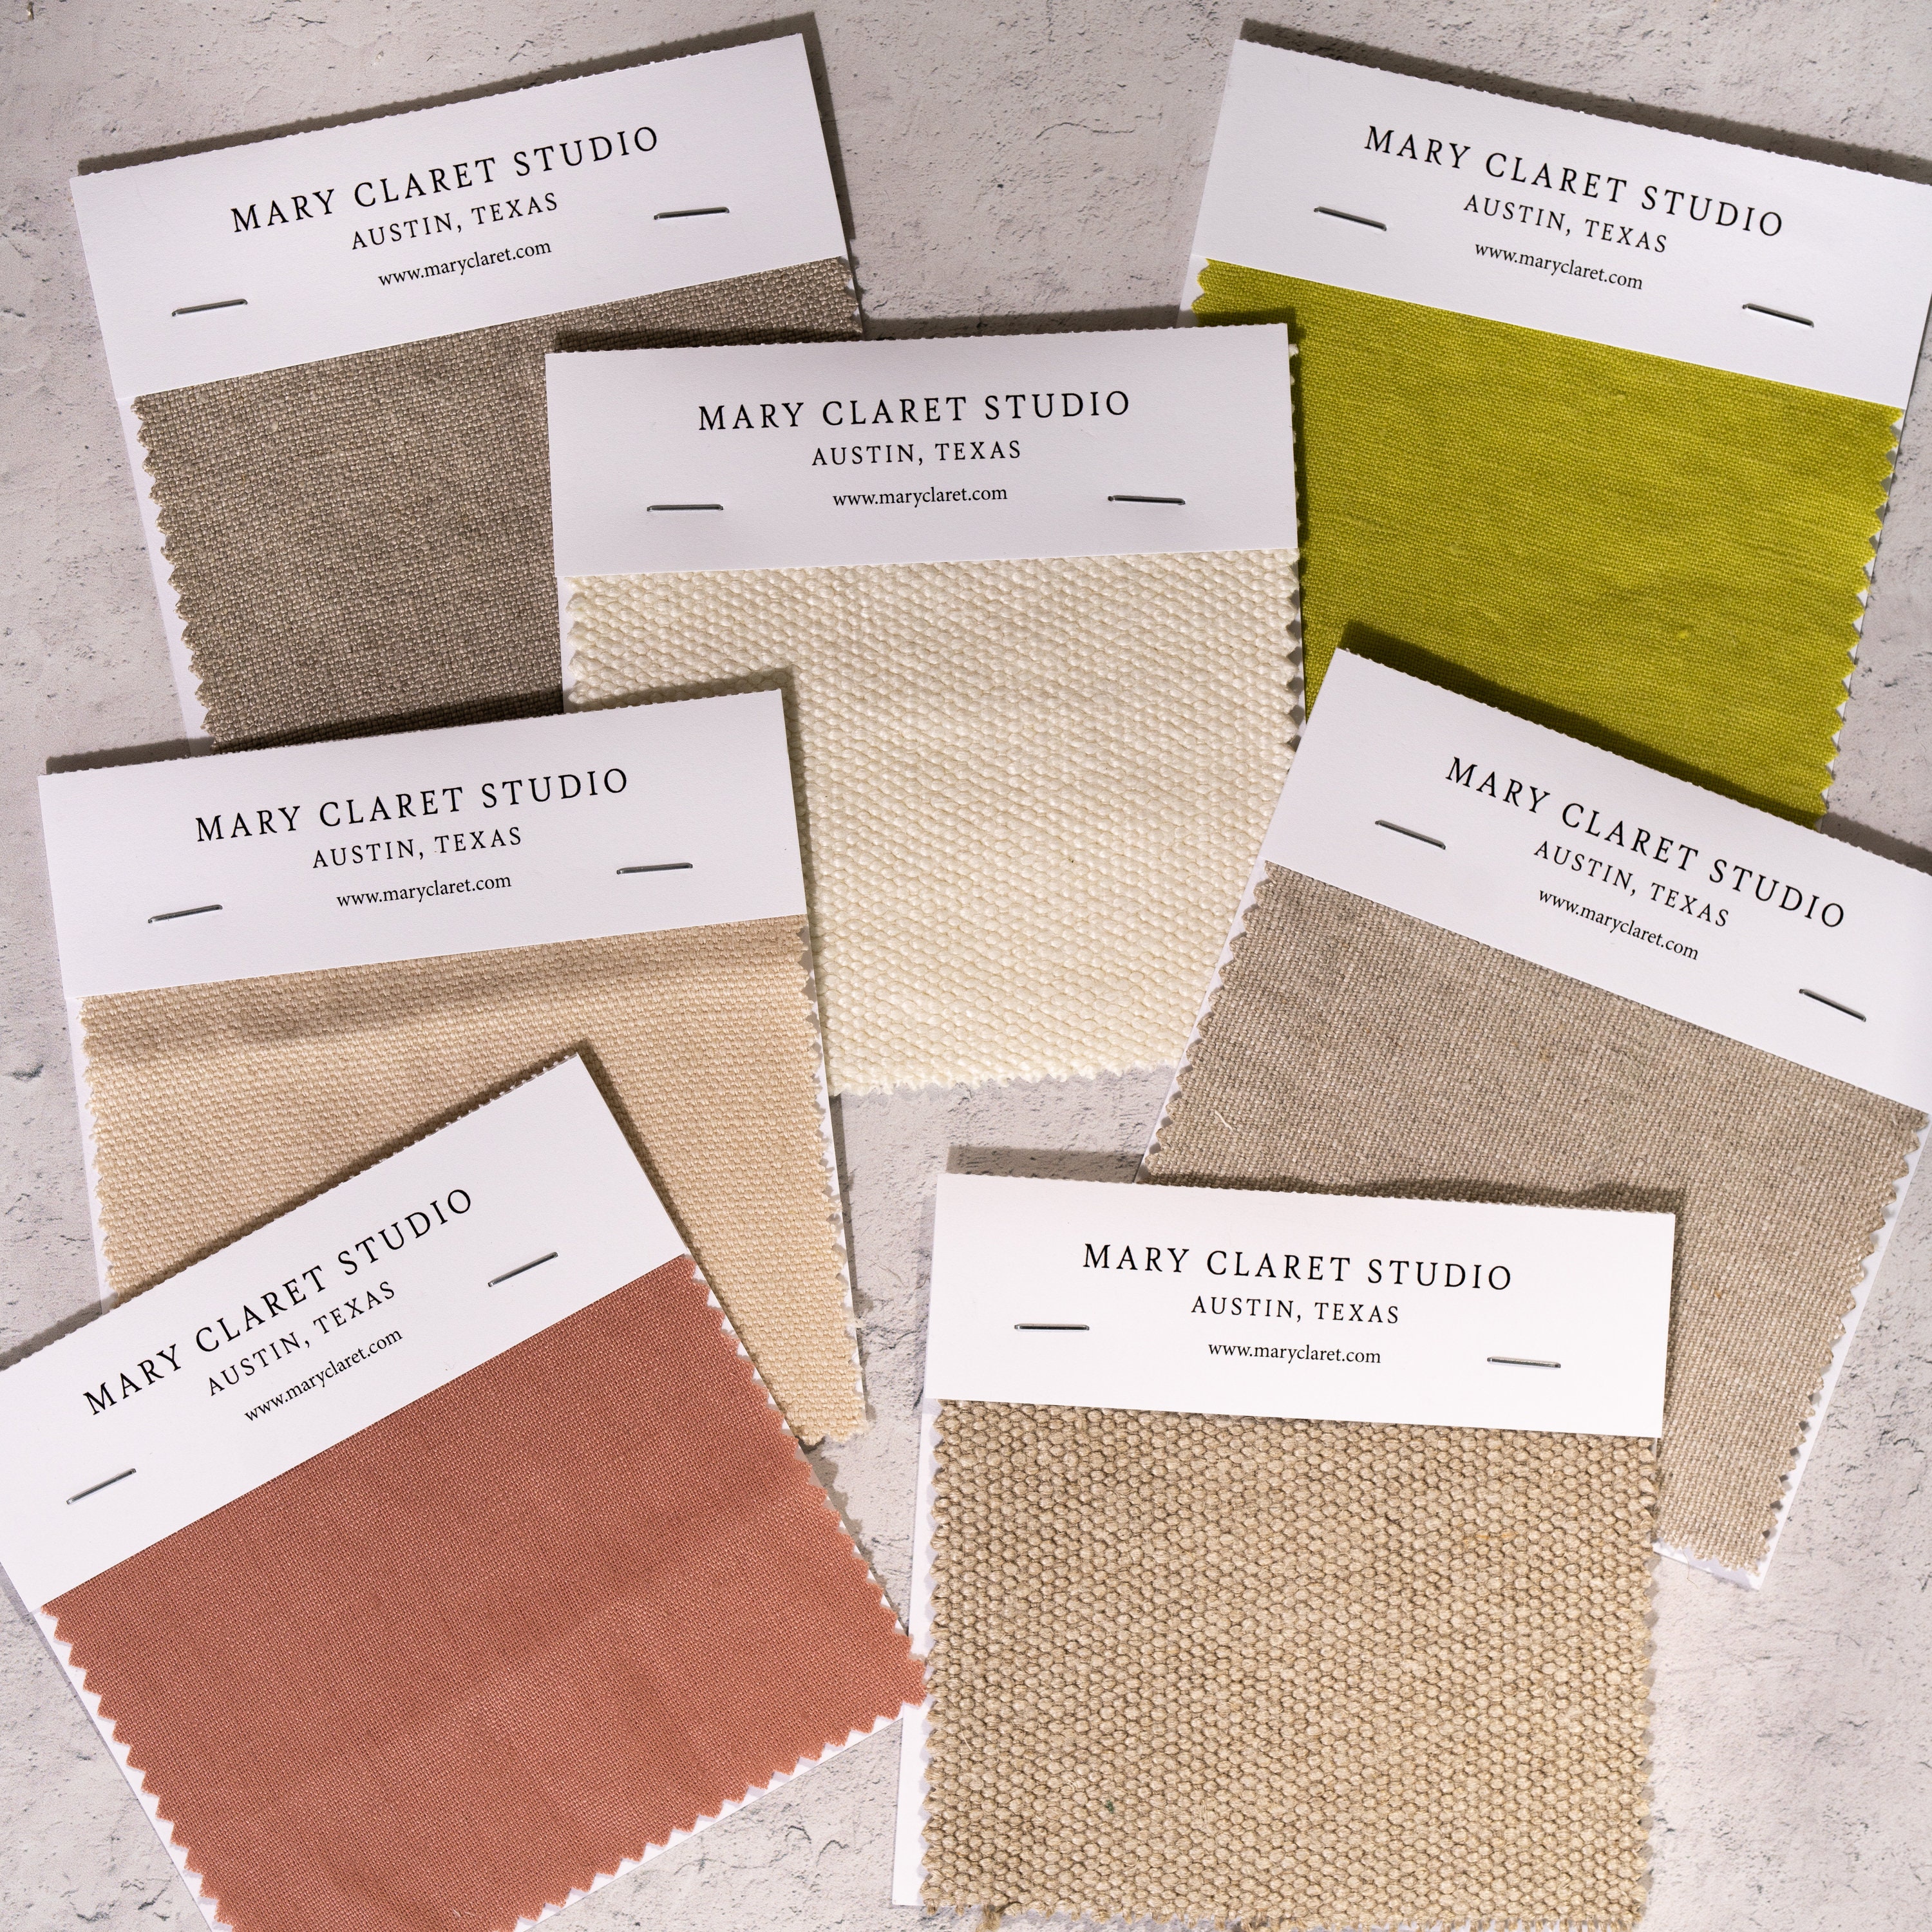 Linen fabric samples / 16 colors softened linen swatches / Washed flax  samples / Linen fabric / Linen colour / Fabric swatches